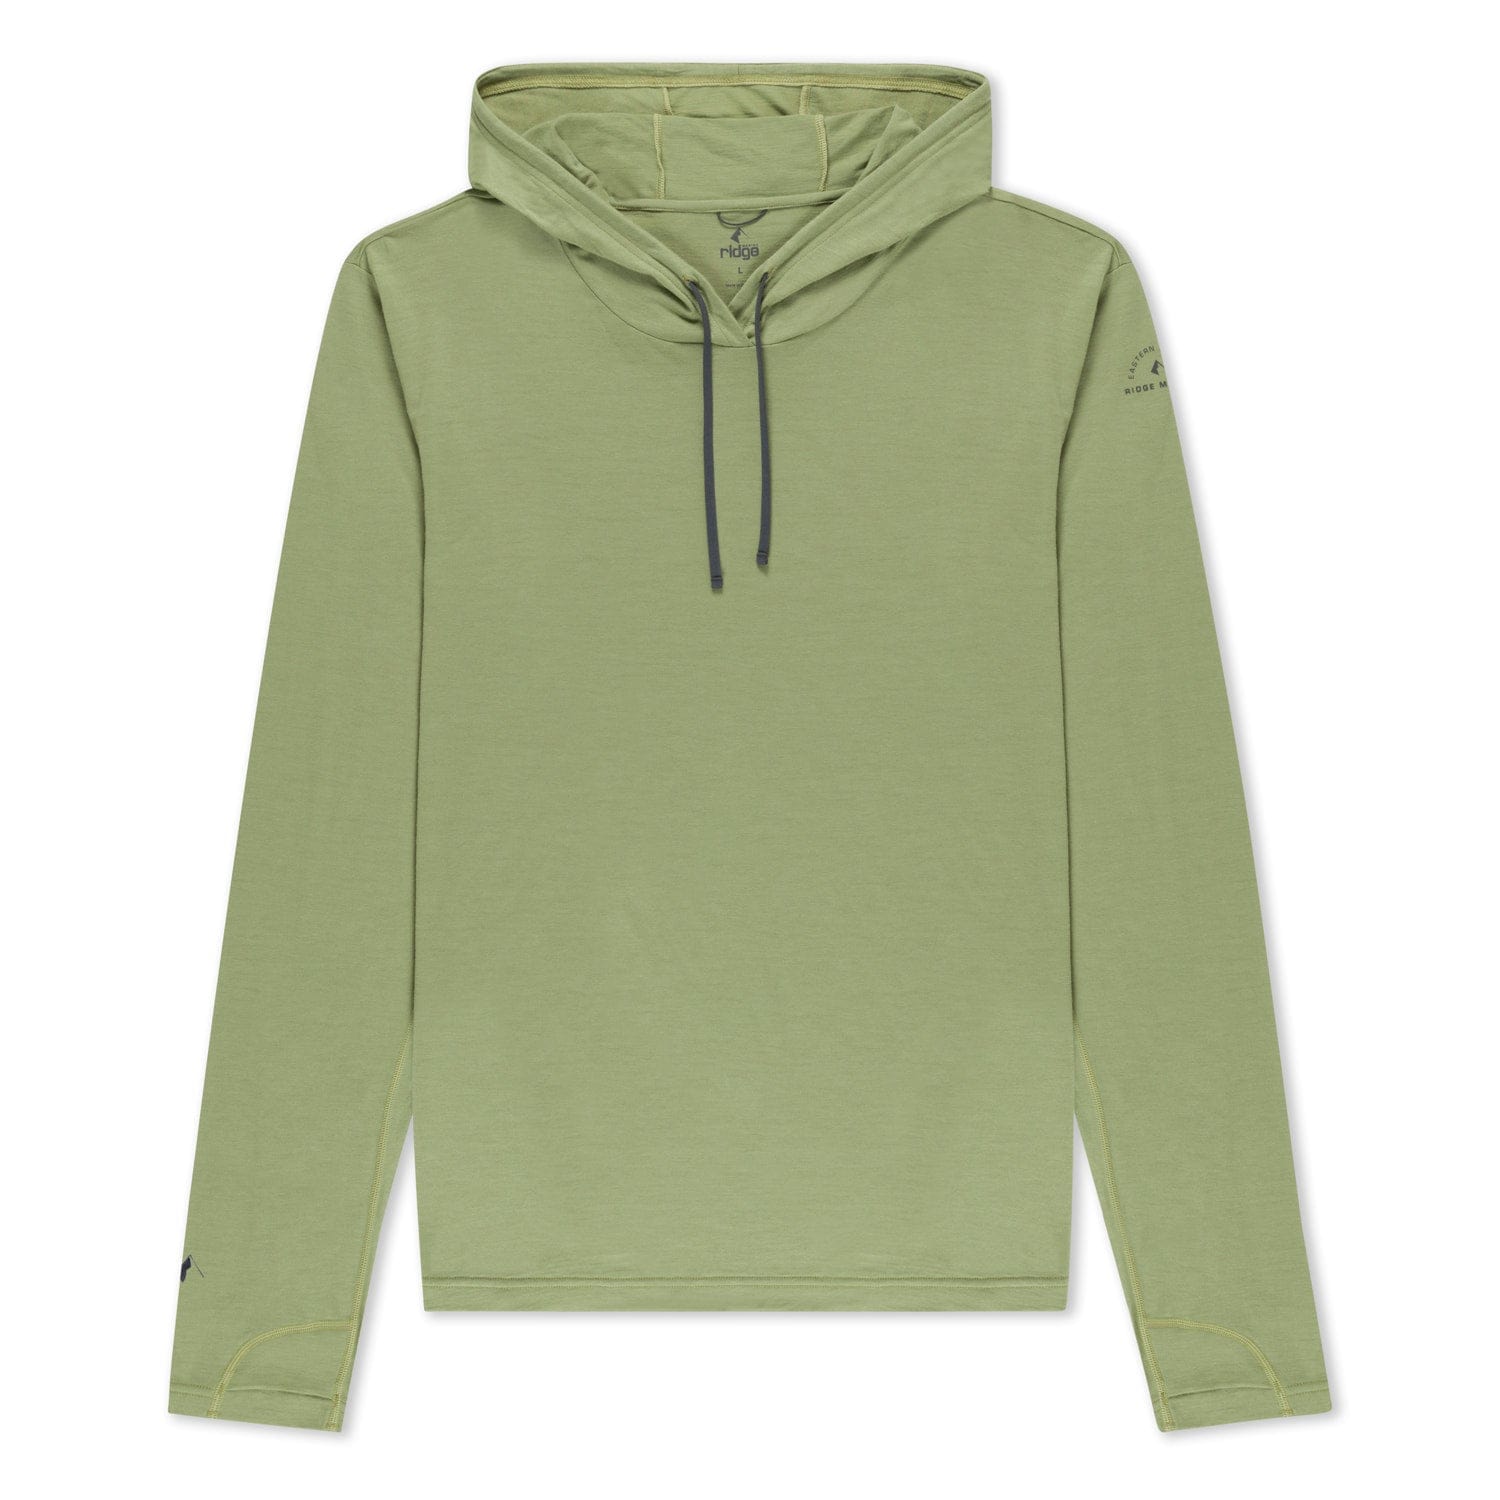 Relaxed Fit Printed Hoodie - Green/Stay Together - Men